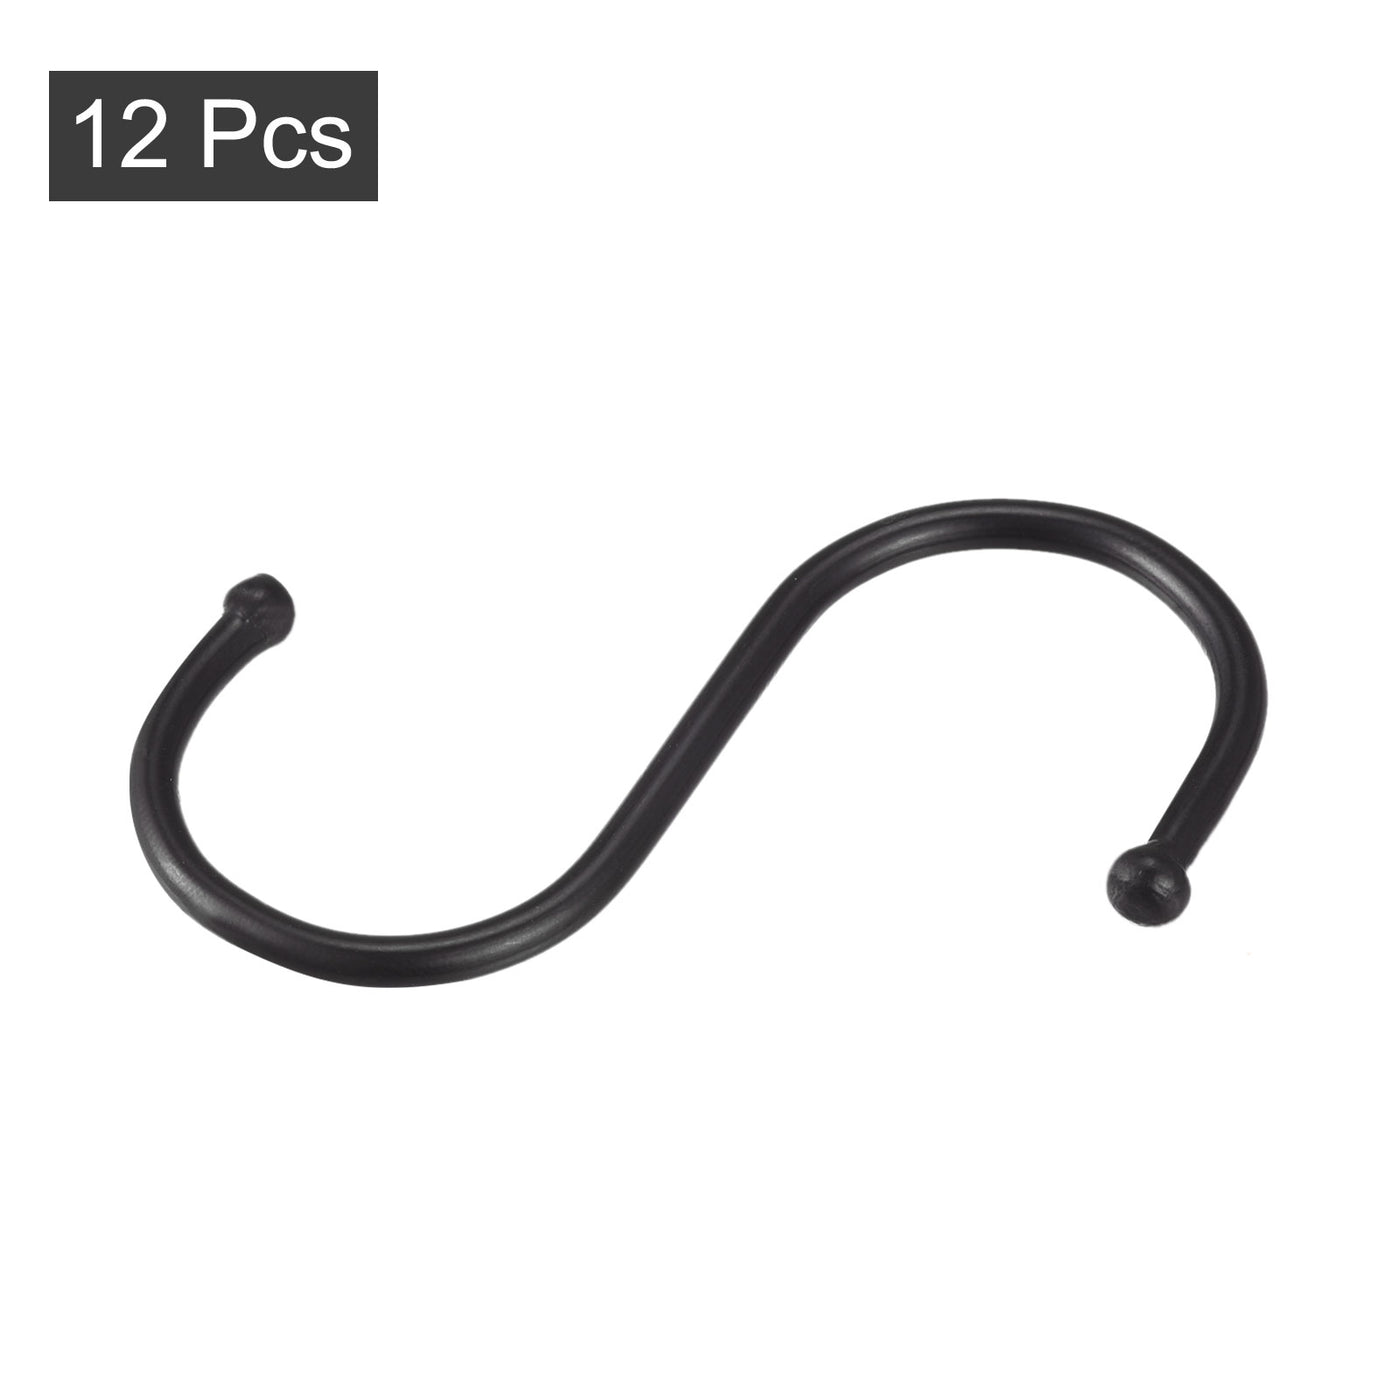 uxcell Uxcell S Hooks 2.56inches Stainless Steel Hanger for Hanging Kitchenware, Bathroom Supplies, Apparel, Black 12Pack